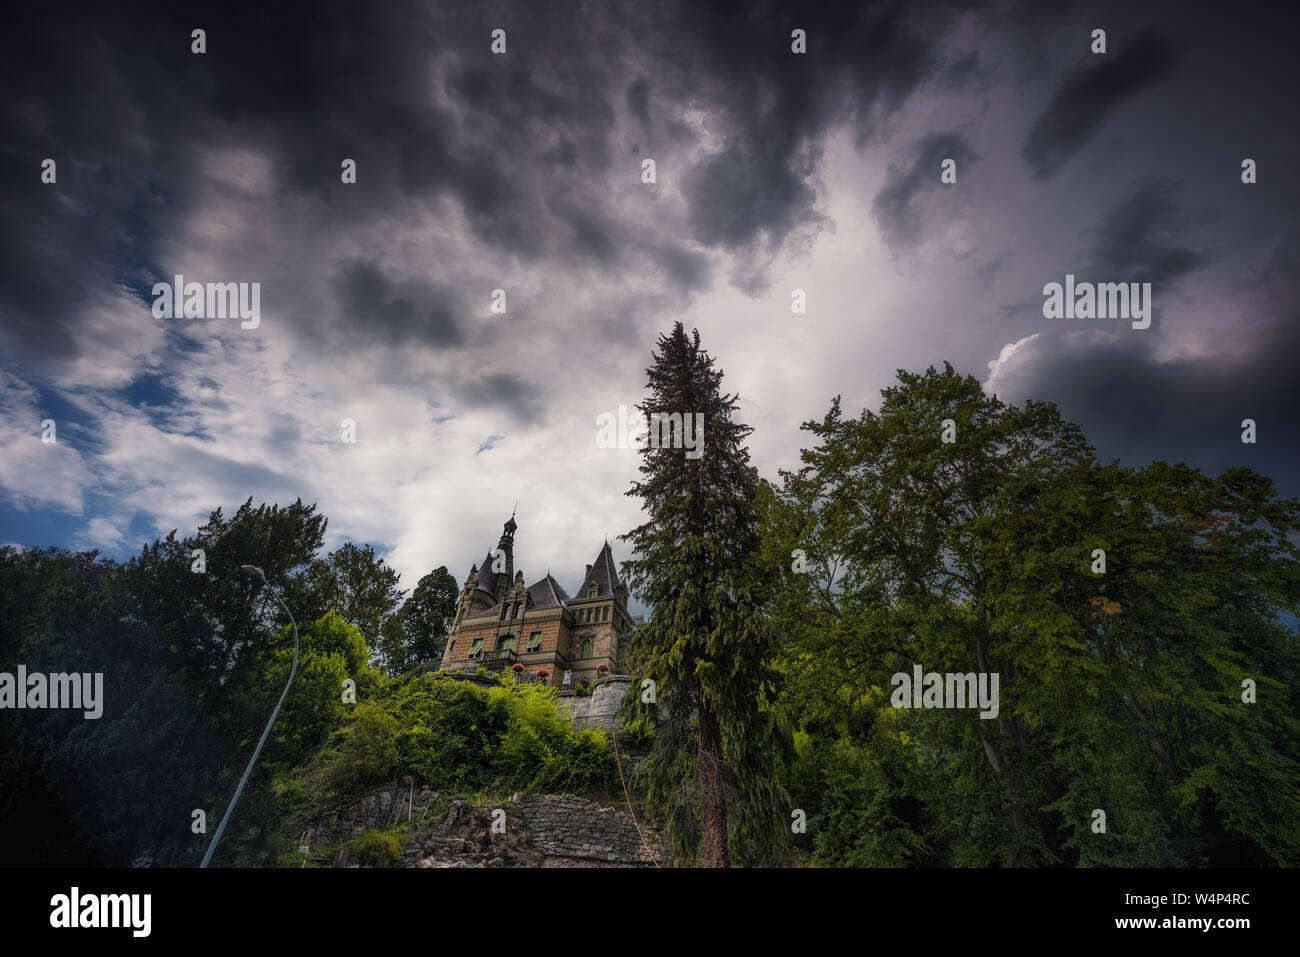 low angle shot of Hünegg castle with dark clouds and spots of blue sky Stock Photo